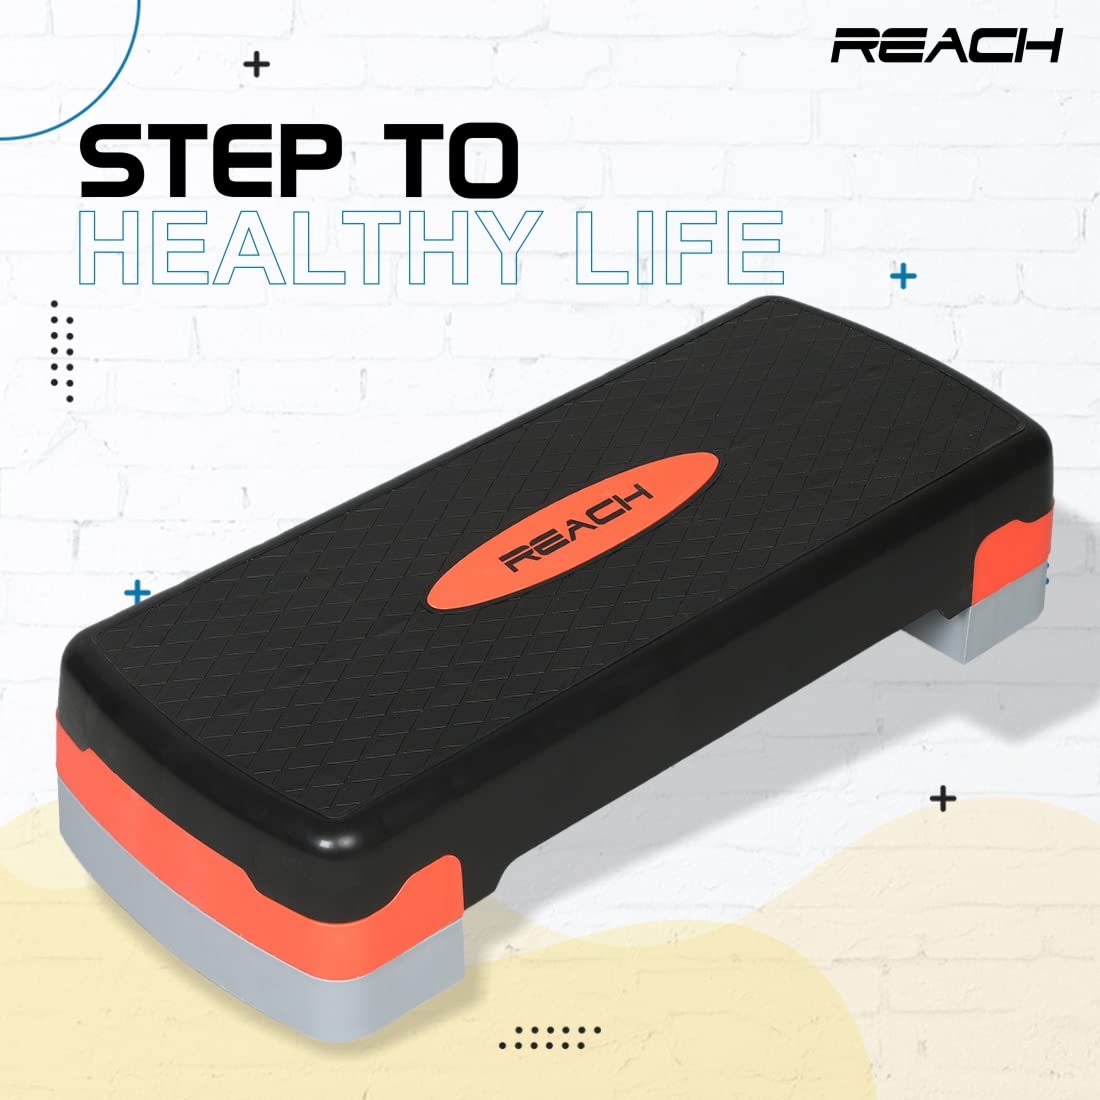 Reach Polypropylene Adjustable Home Gym Fitness Stepper for Exercise | Gym Bench, Workout Bench Best for Weight Loss | Workout Board with Non-Slip Surface & Good Quality Material (Orange)